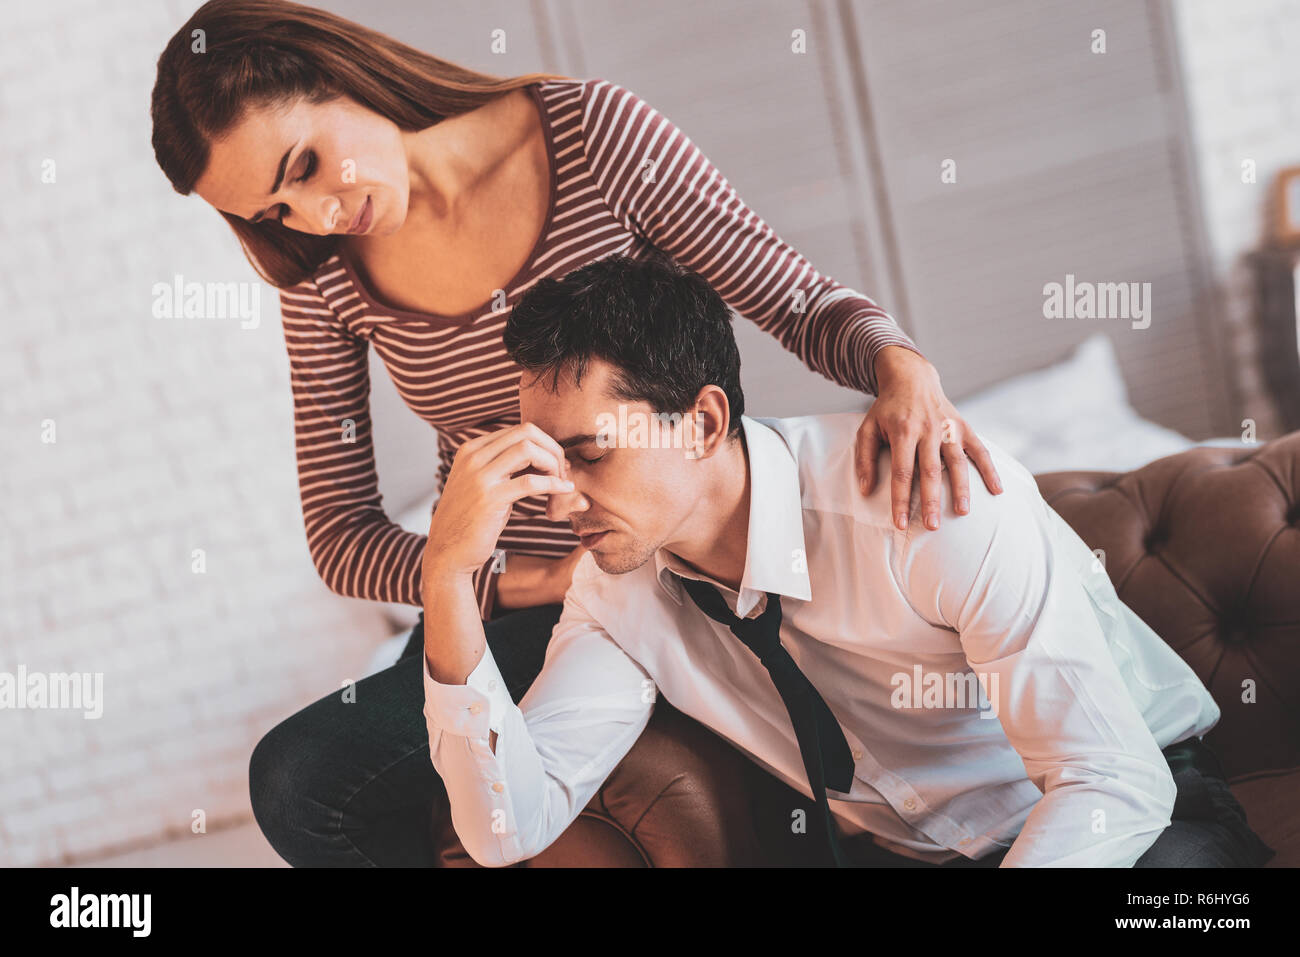 Depressed man closing his eyes and a wife sitting near Stock Photo